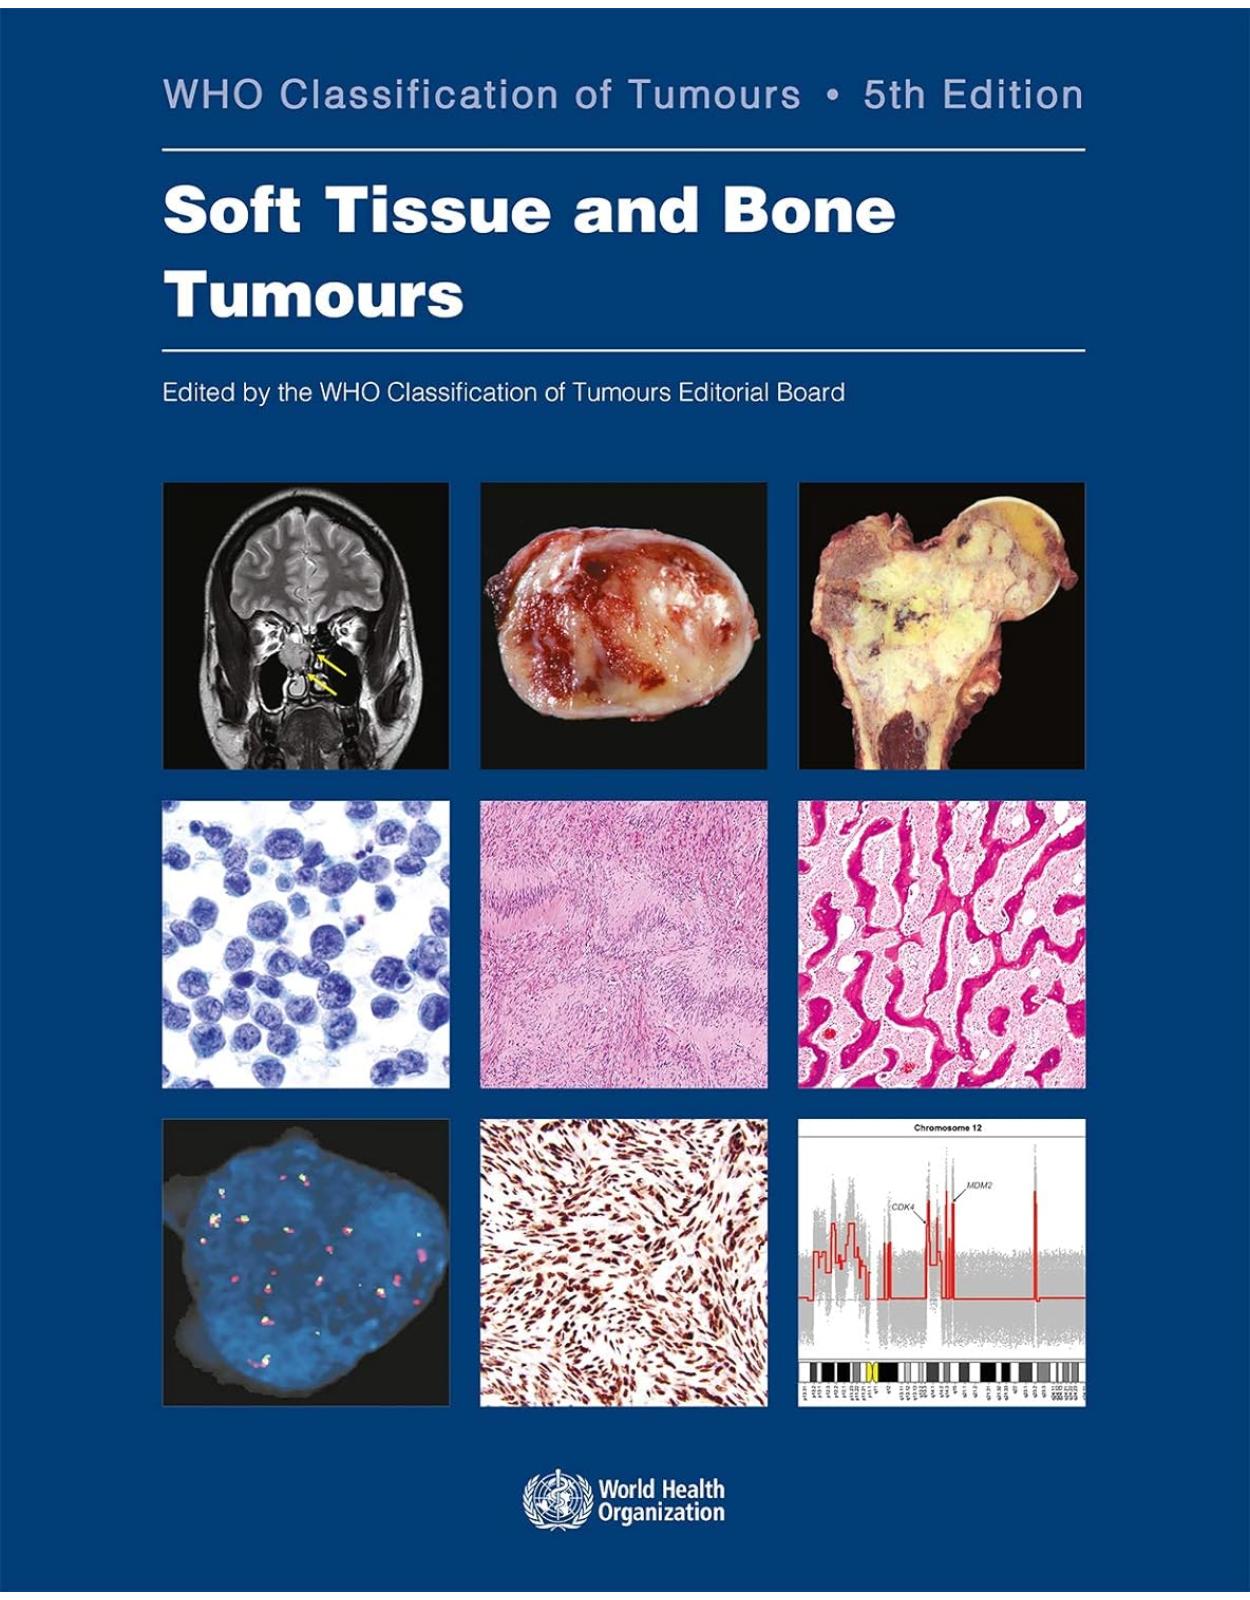 Soft Tissue and Bone Tumours. WHO Classification of Tumours, 5th Edition, Volume 3